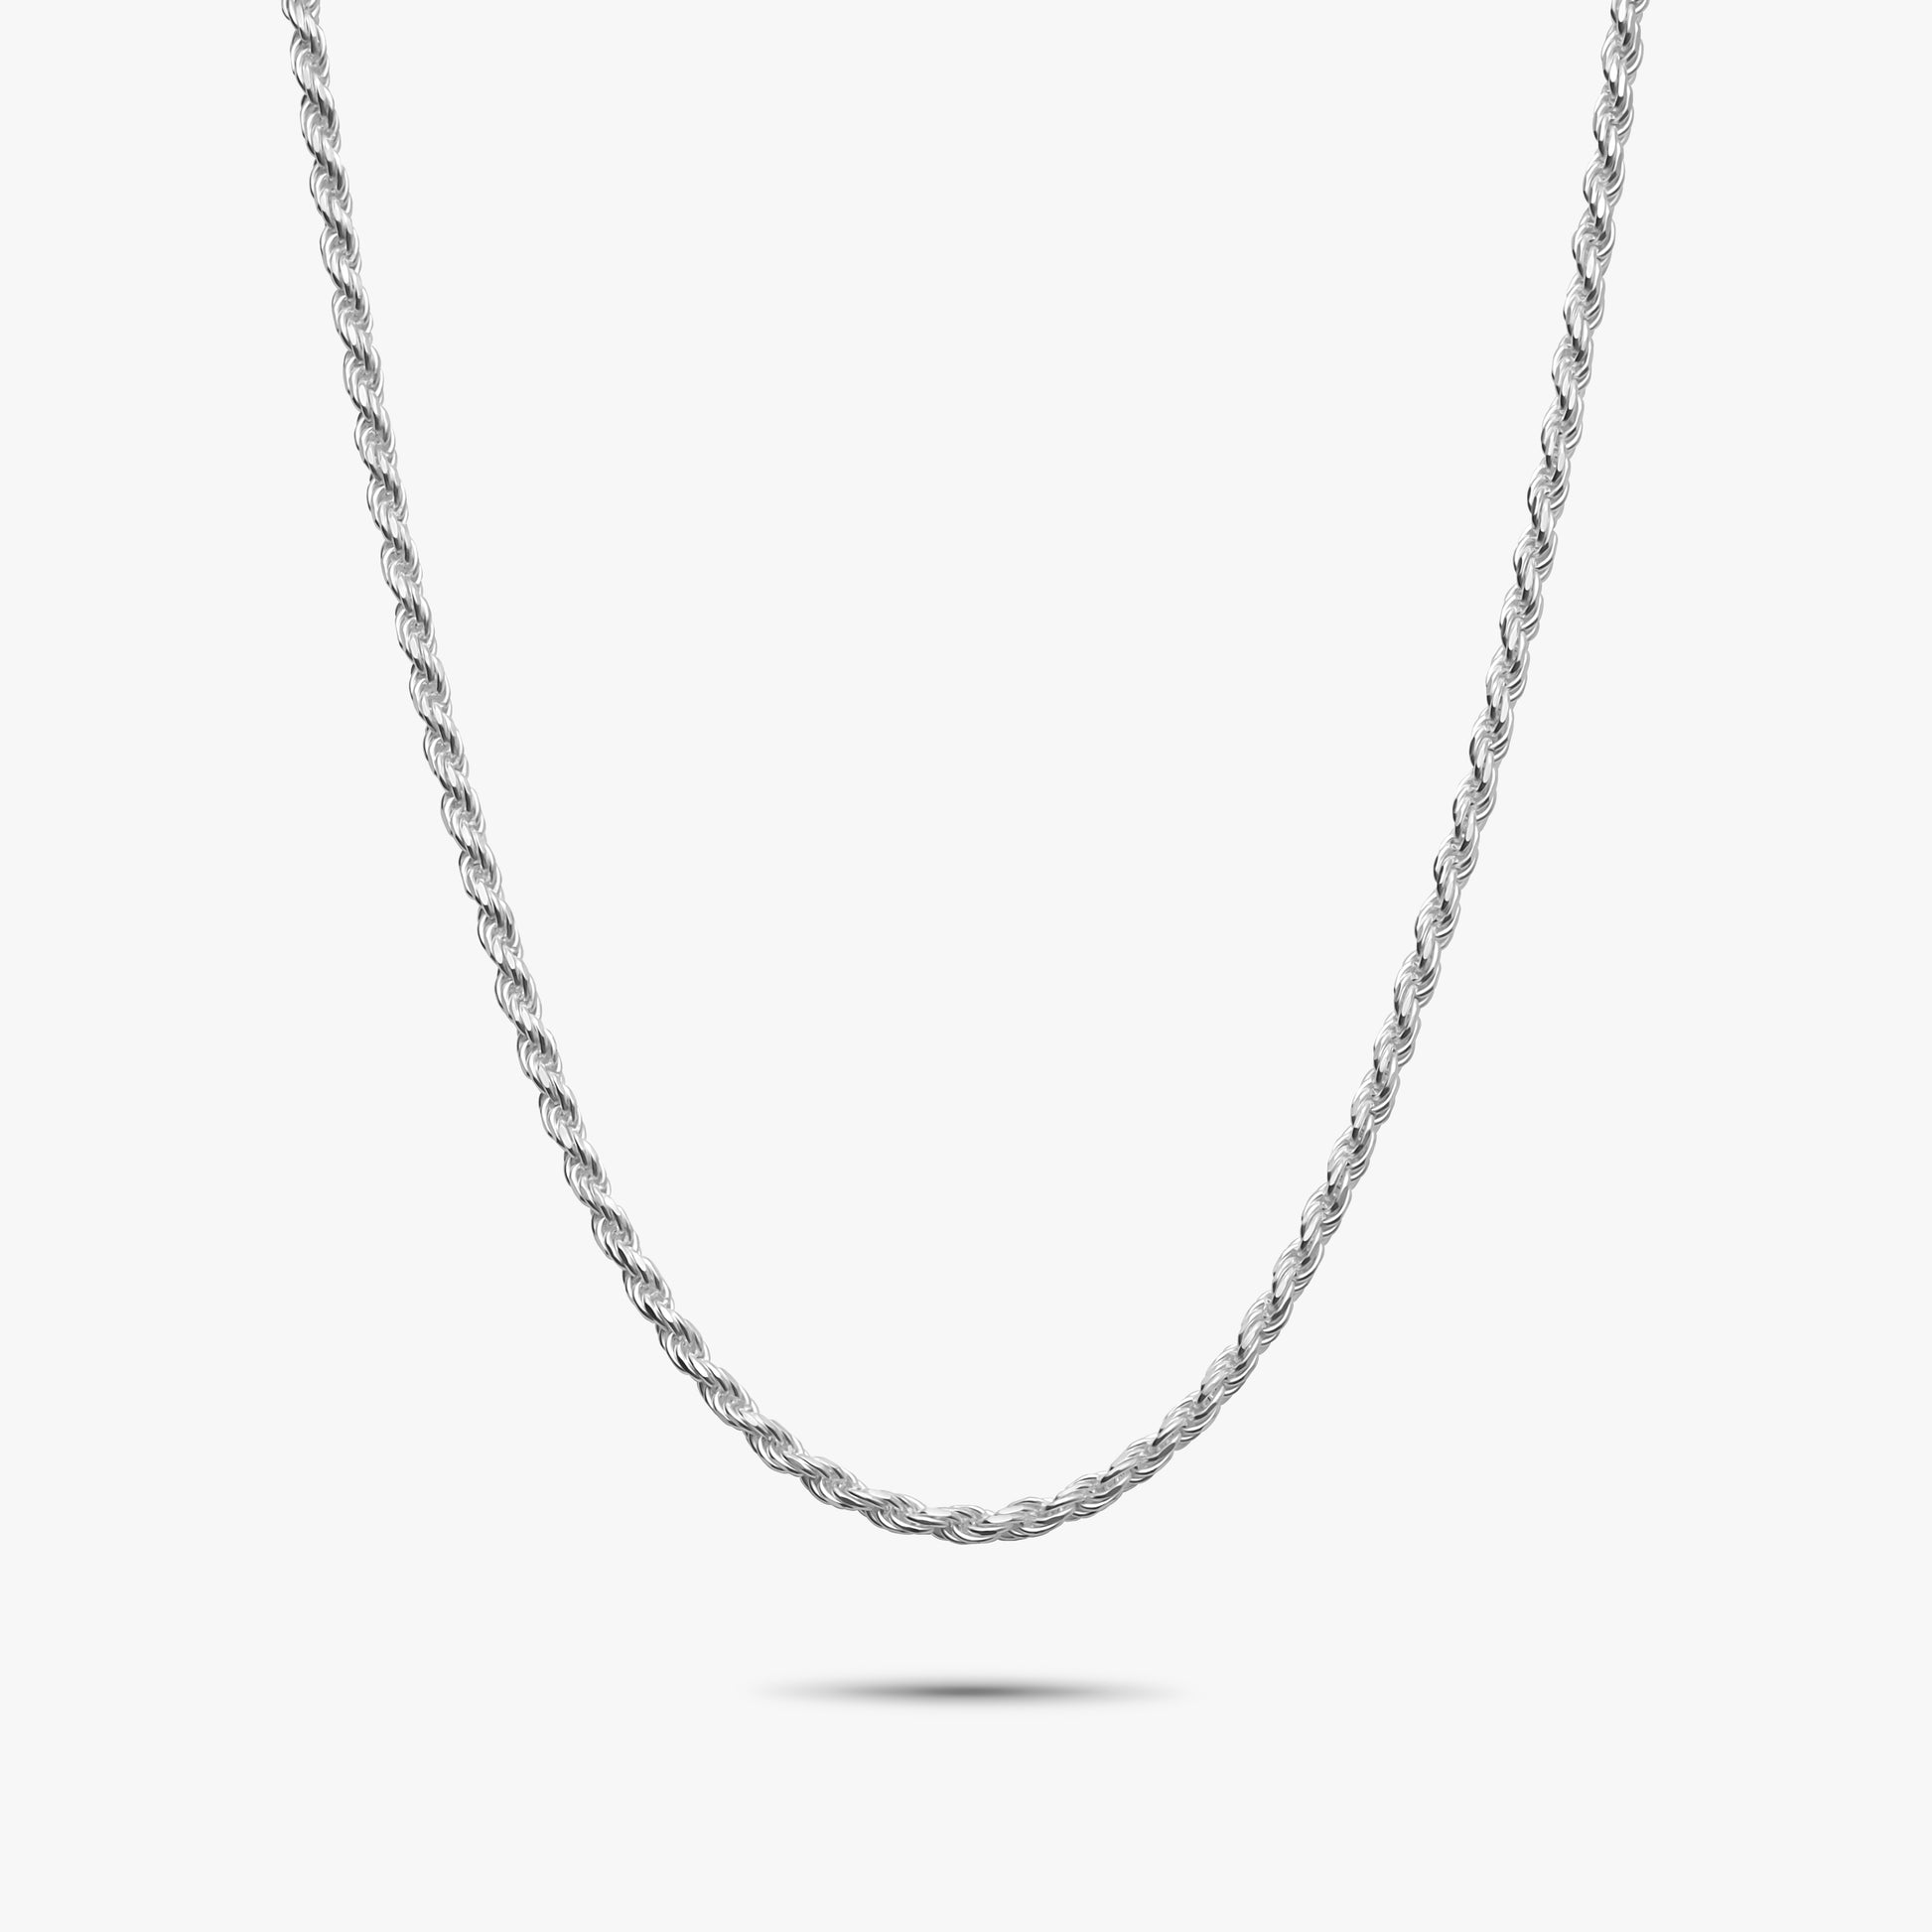 1.8mm sterling silver diamond cut rope chain